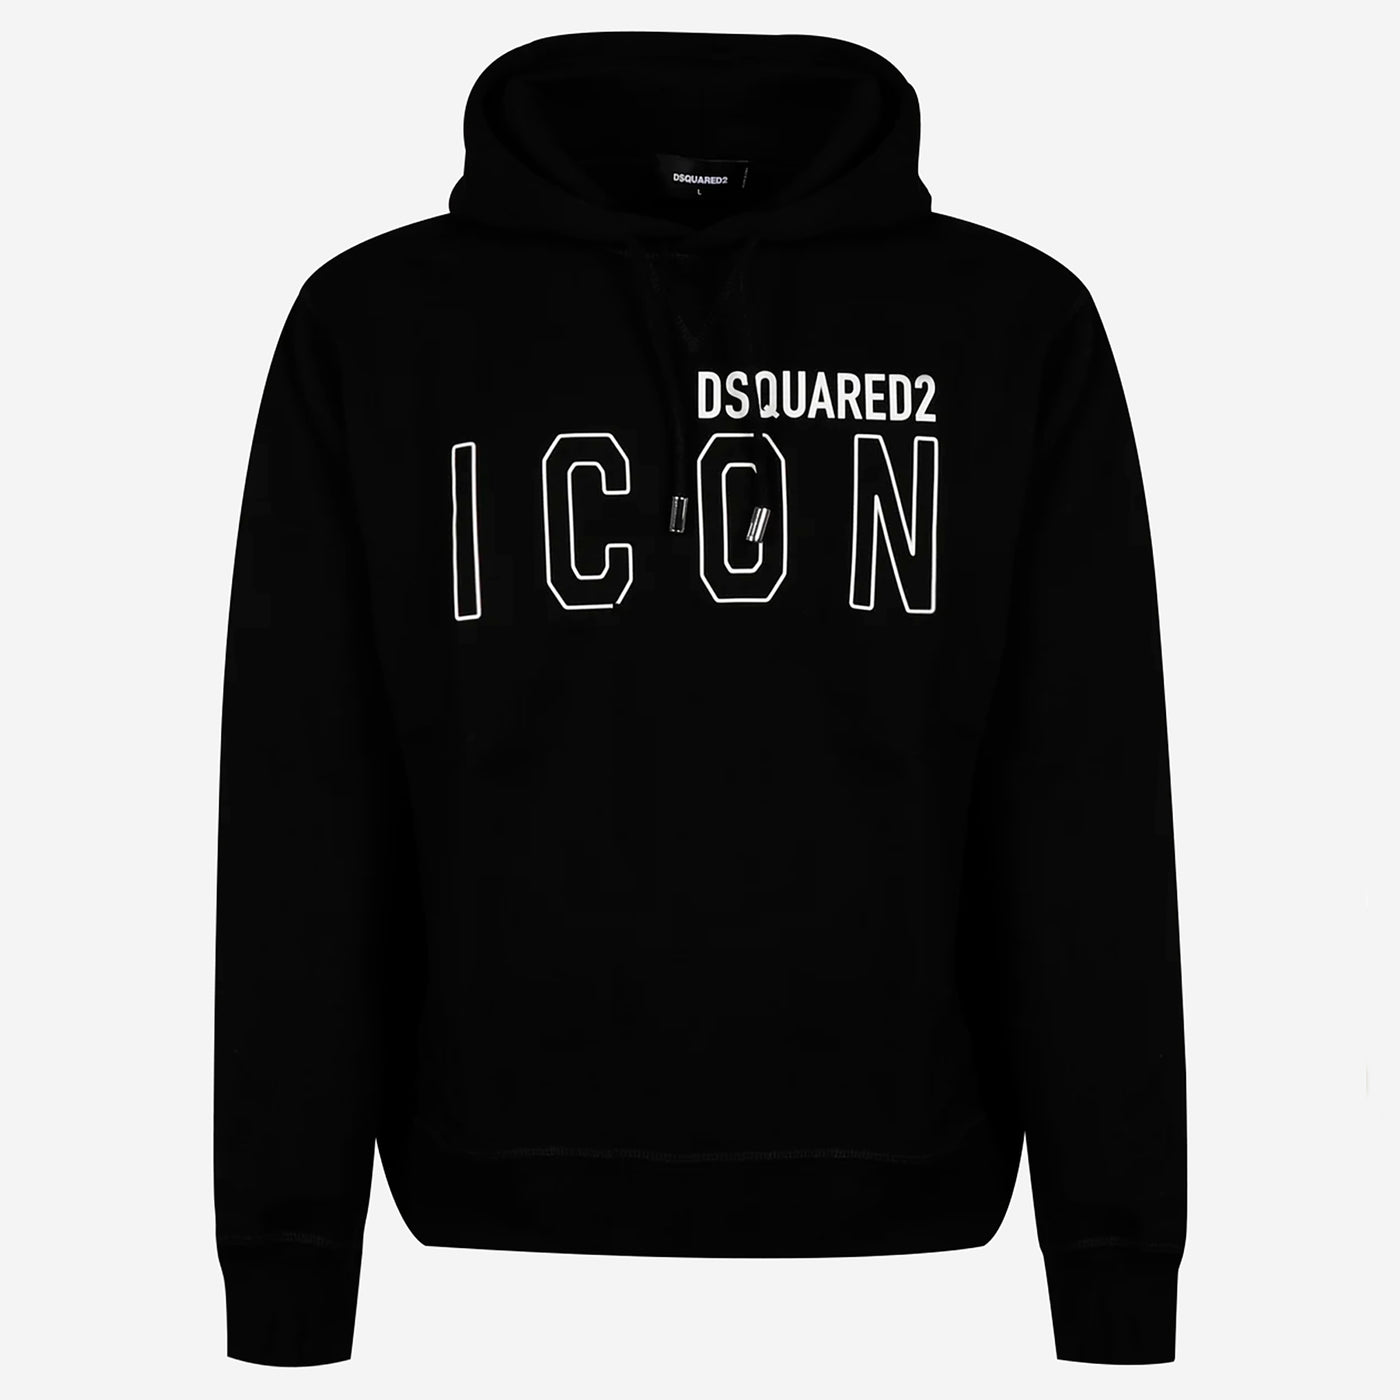 Dsquared2 ICON Outline Hoodie